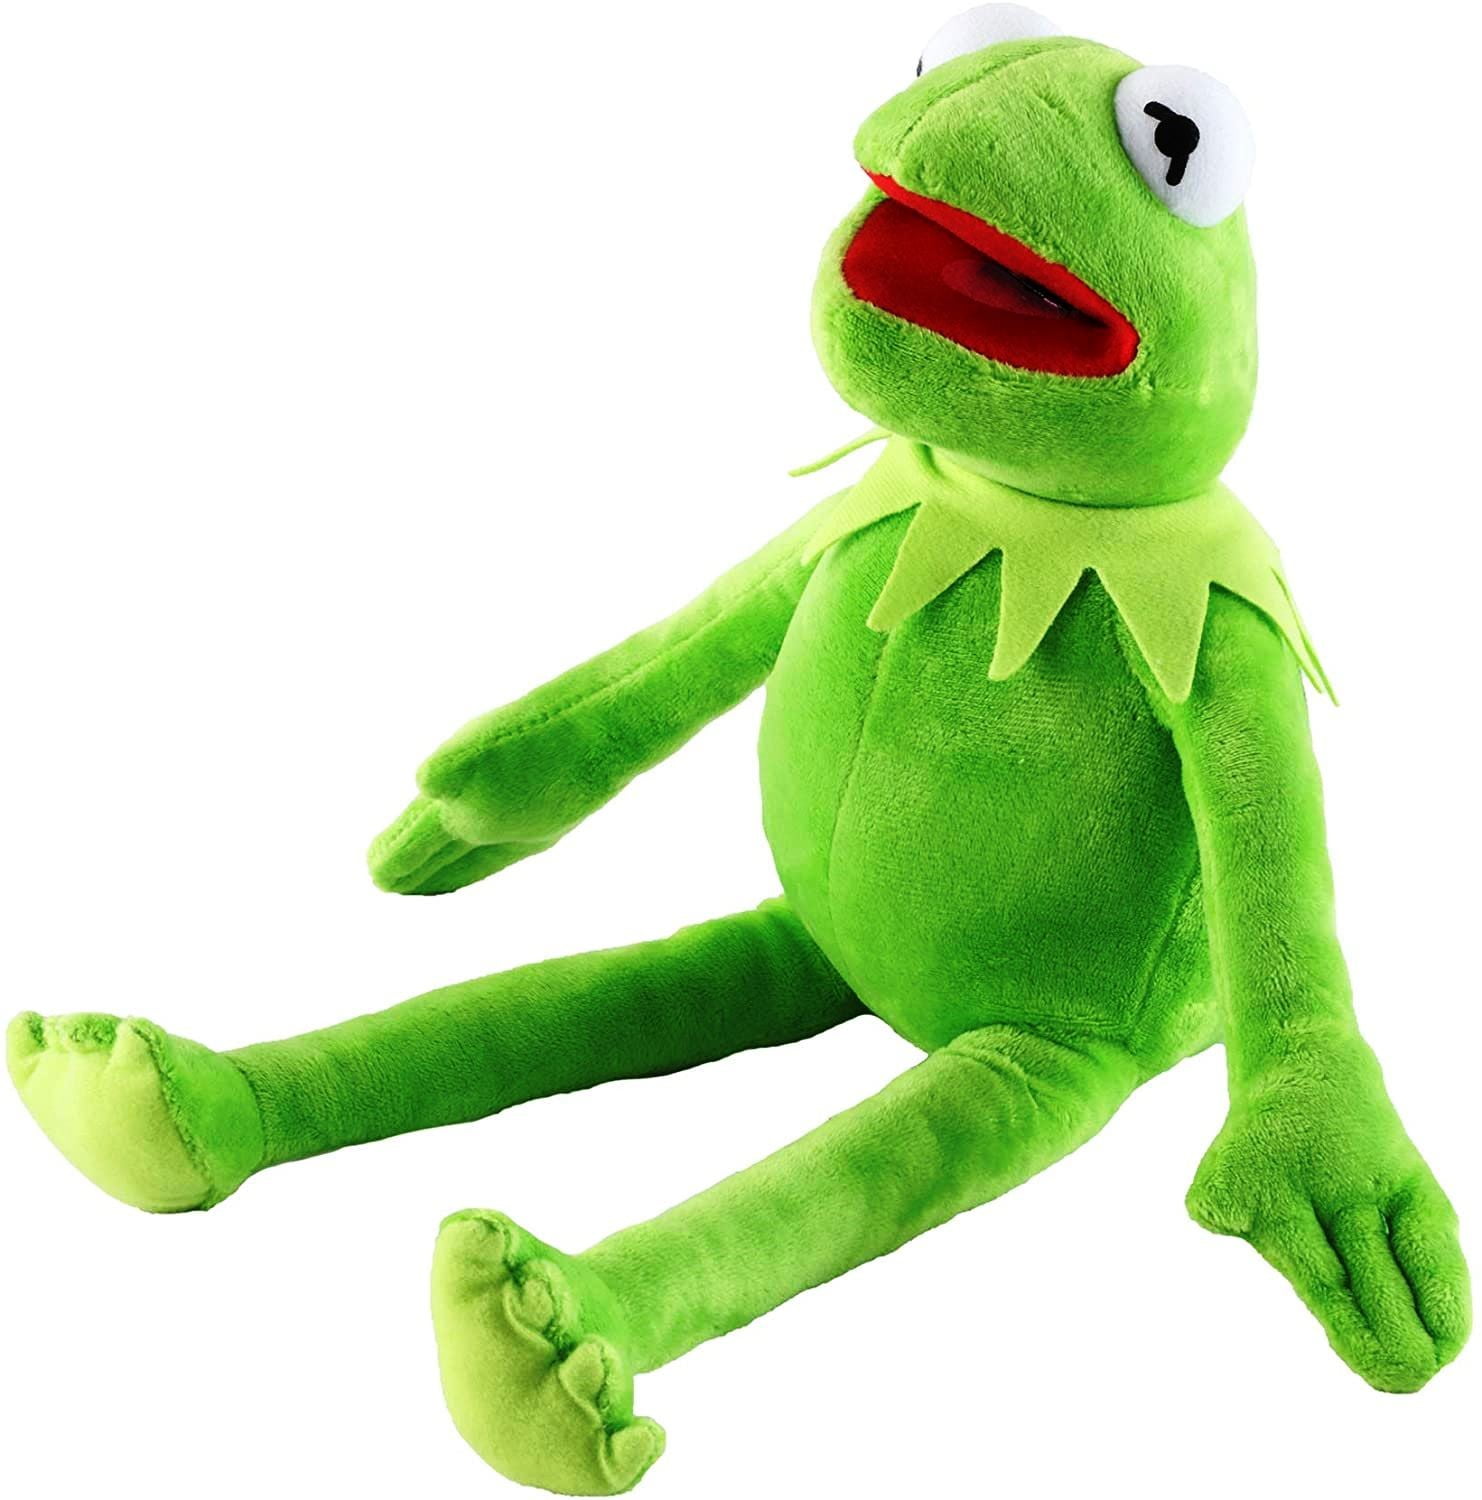 Kermit the frog doll